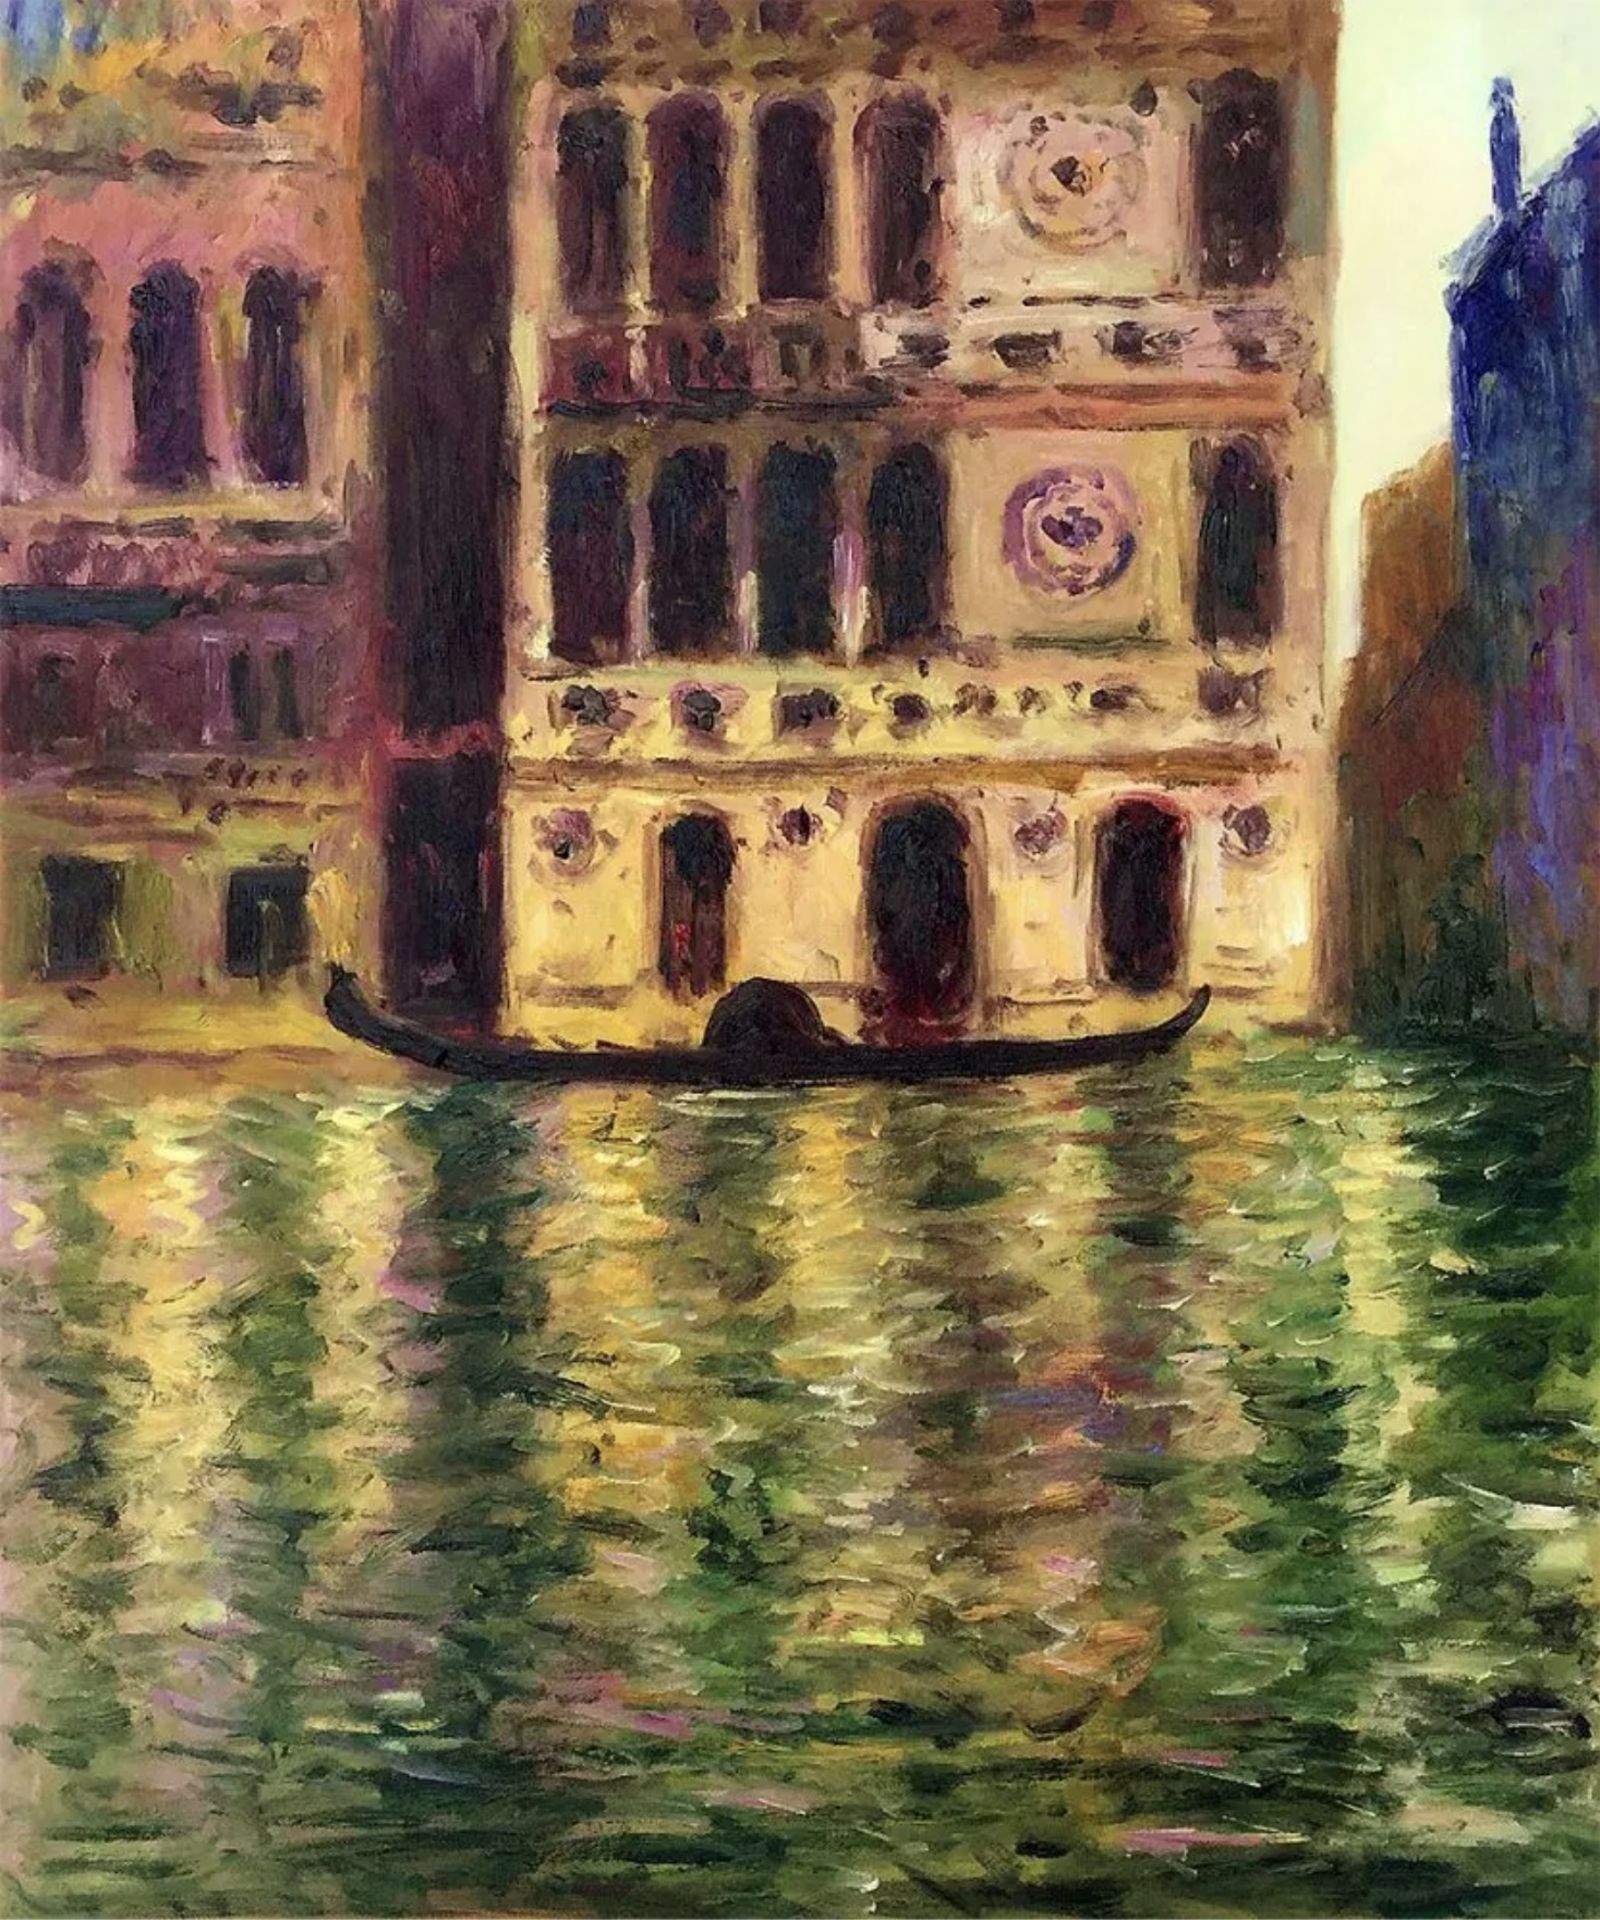 Claude Monet "Palazzo Dario, 1908" Oil Painting, After